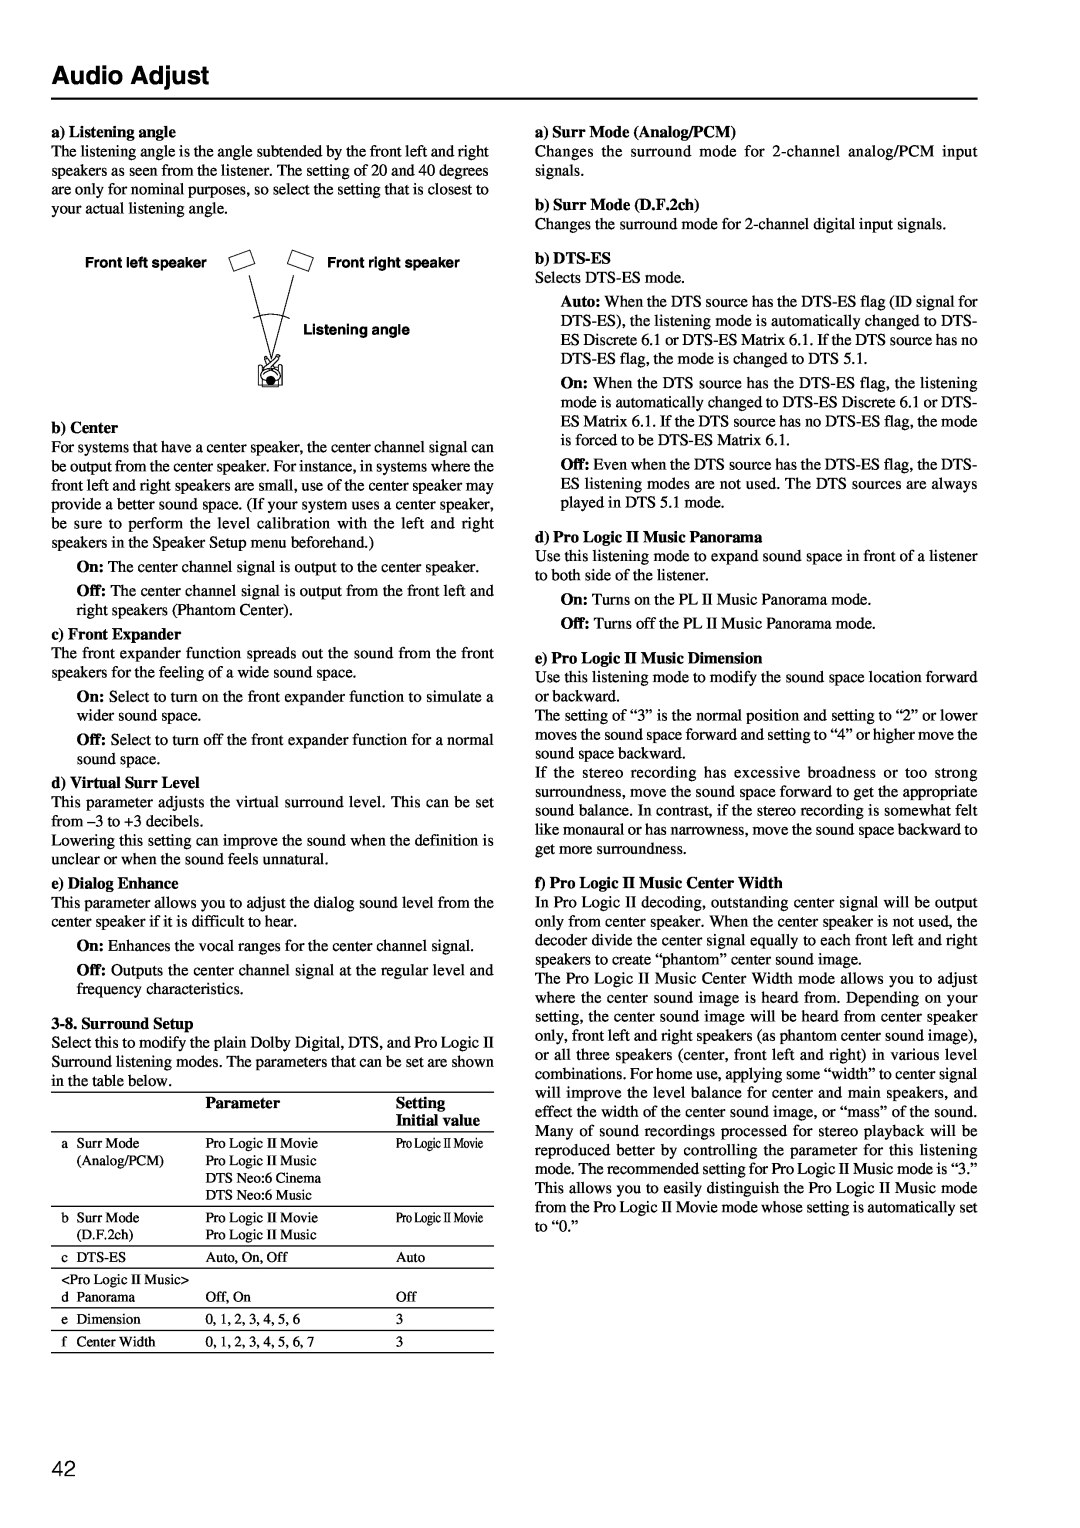 Onkyo TX-DS898 instruction manual Audio Adjust, a Listening angle 